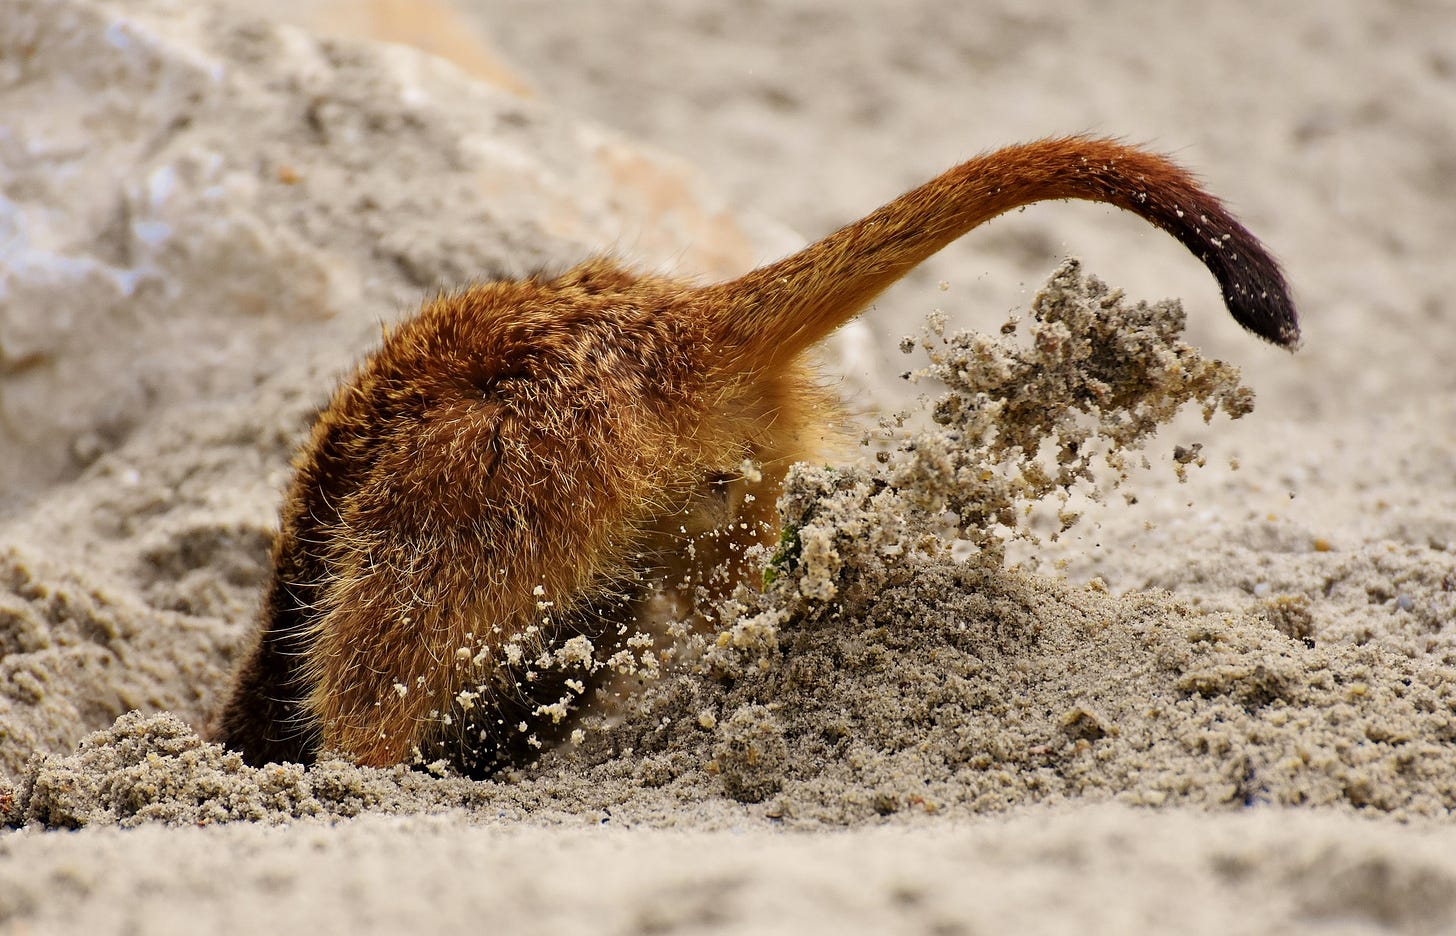 A meerkat digs a hole in the sand near a whitish-orange rock. Only the rust-brown hindquarters and tail are visible, the remainder of the meerkat being down the hole. The camera has caught a spray of damp sand shooting up into the air from between its hind legs.